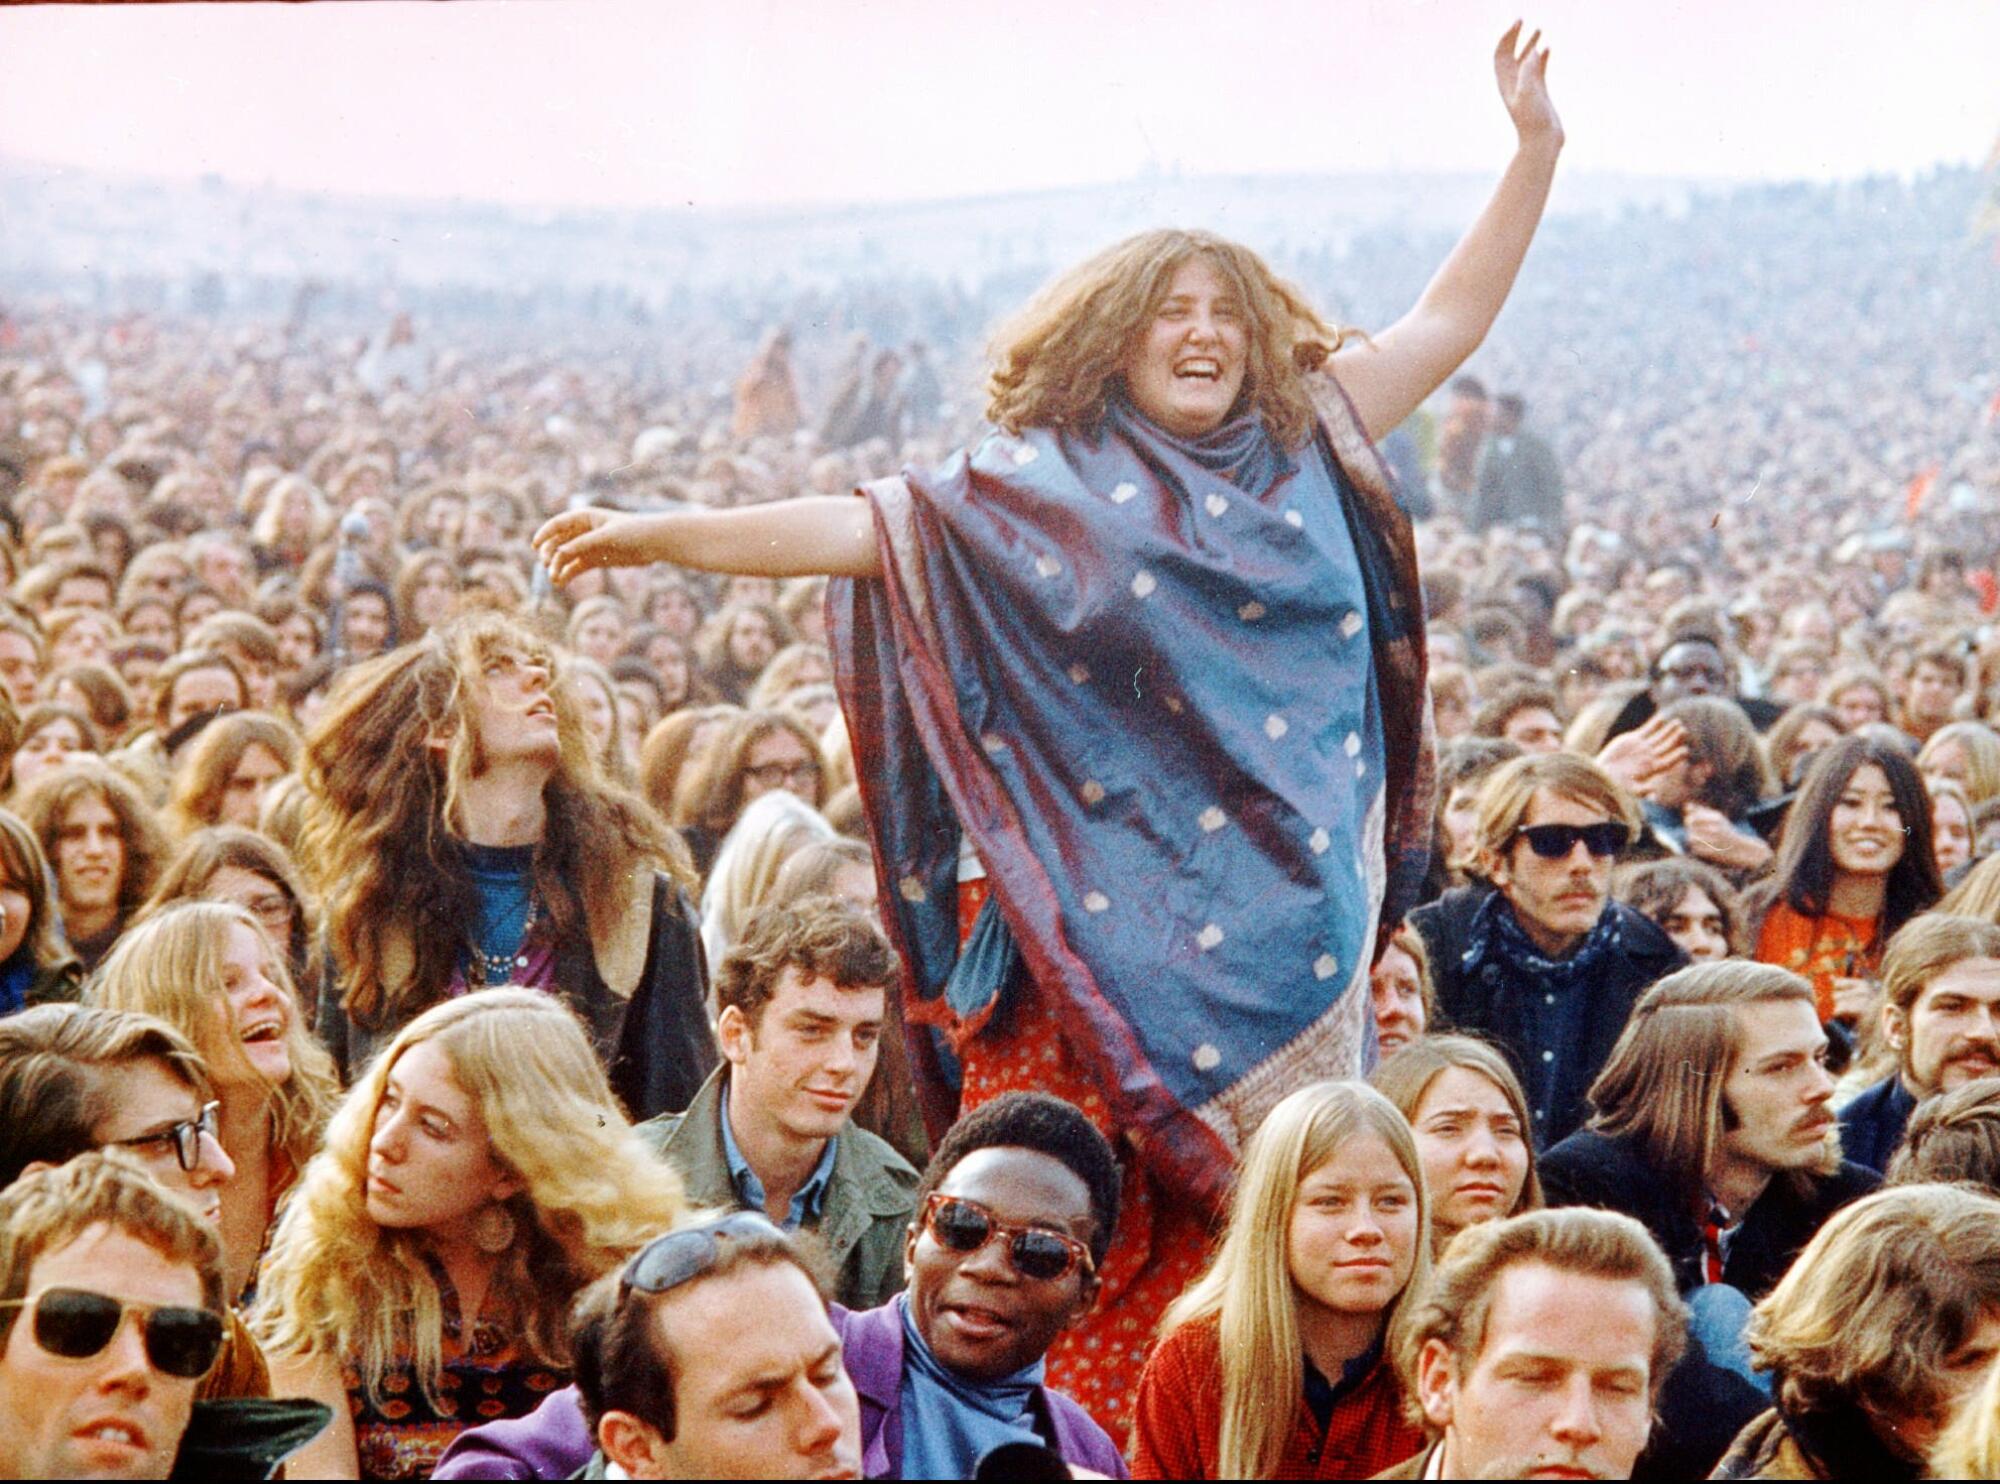 A woman is seen in the crowd at a concert at the Altamont racetrack in Livermore, Calif., on Dec. 6, 1969.